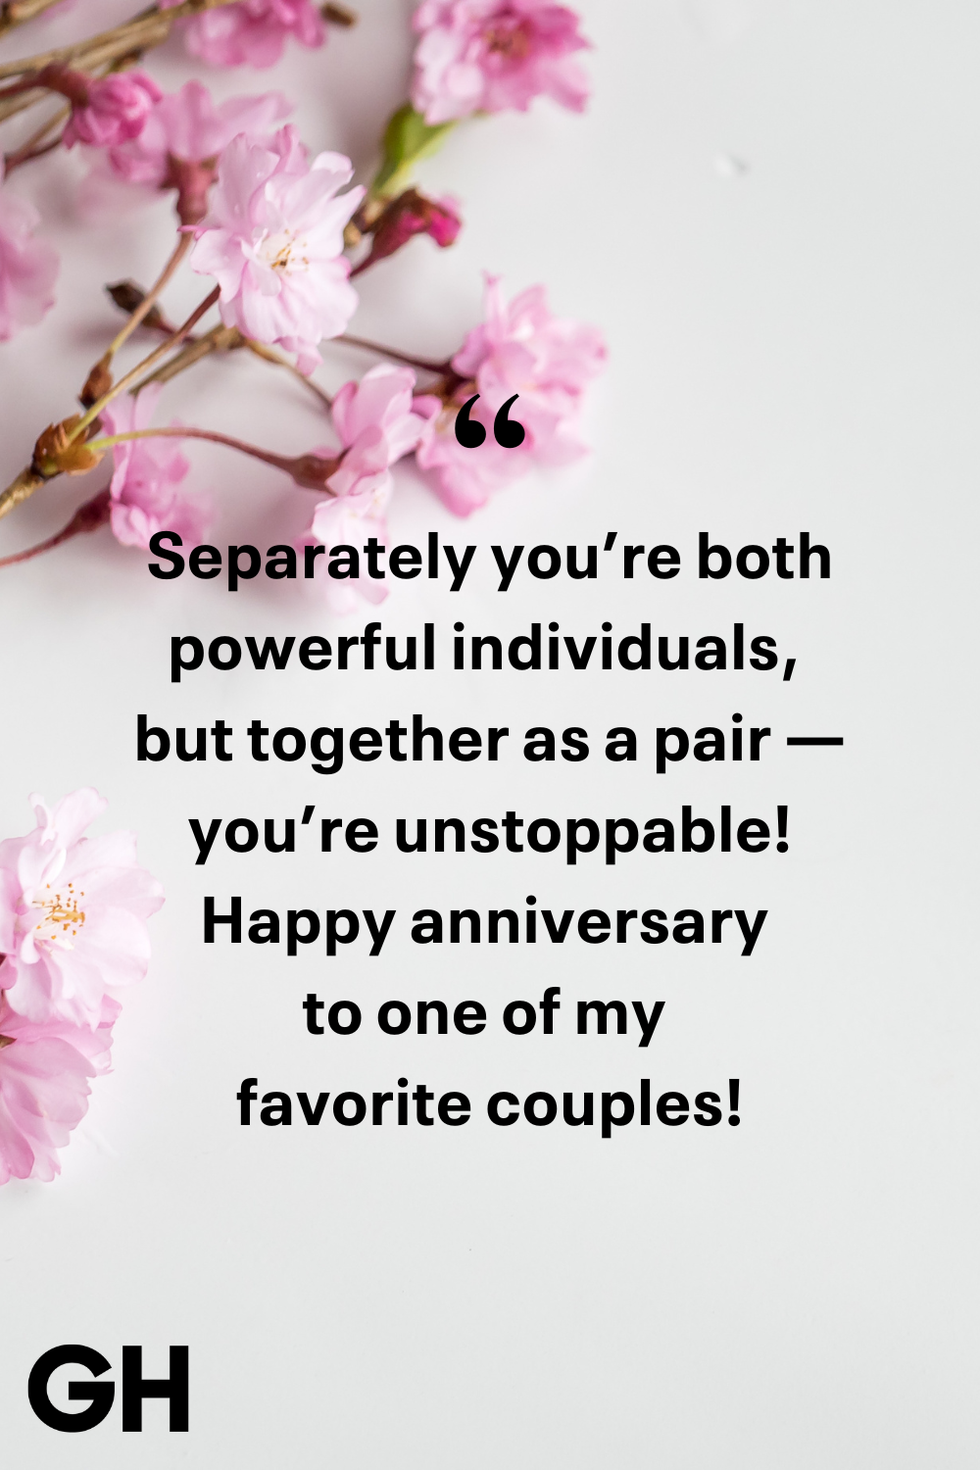 cute anniversary quotes for couples and friends